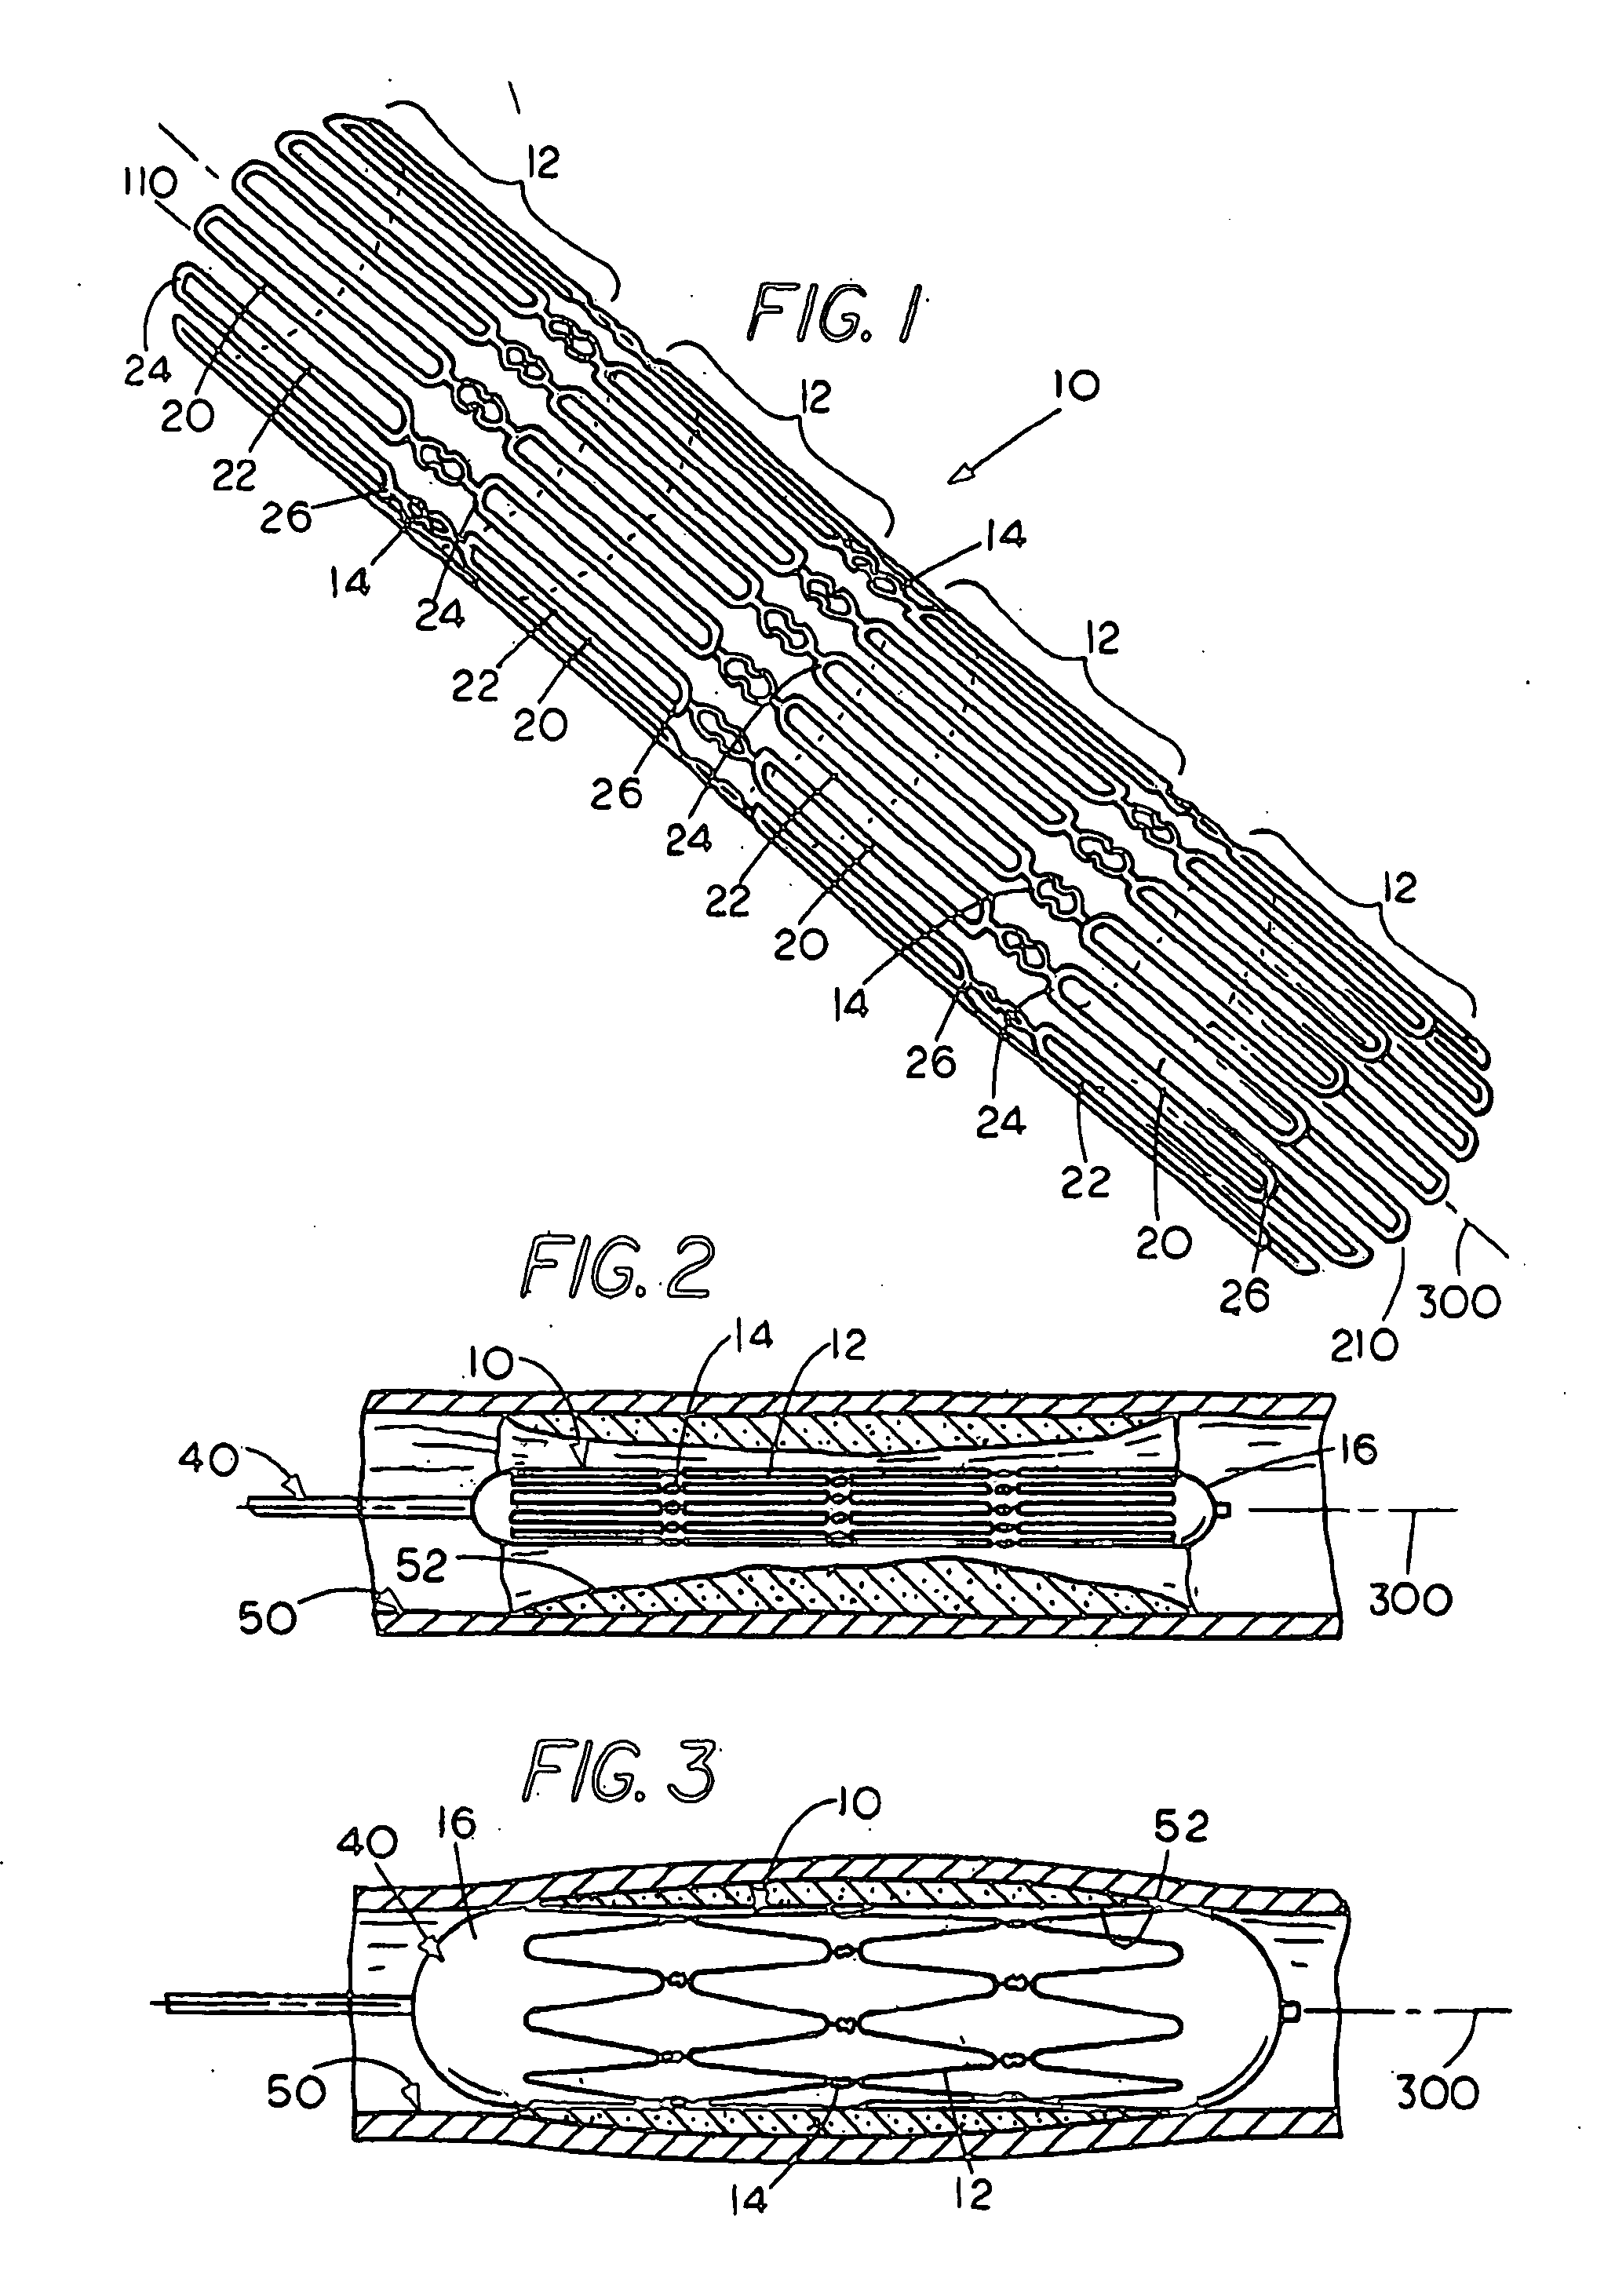 Flexible cells for axially interconnecting stent components